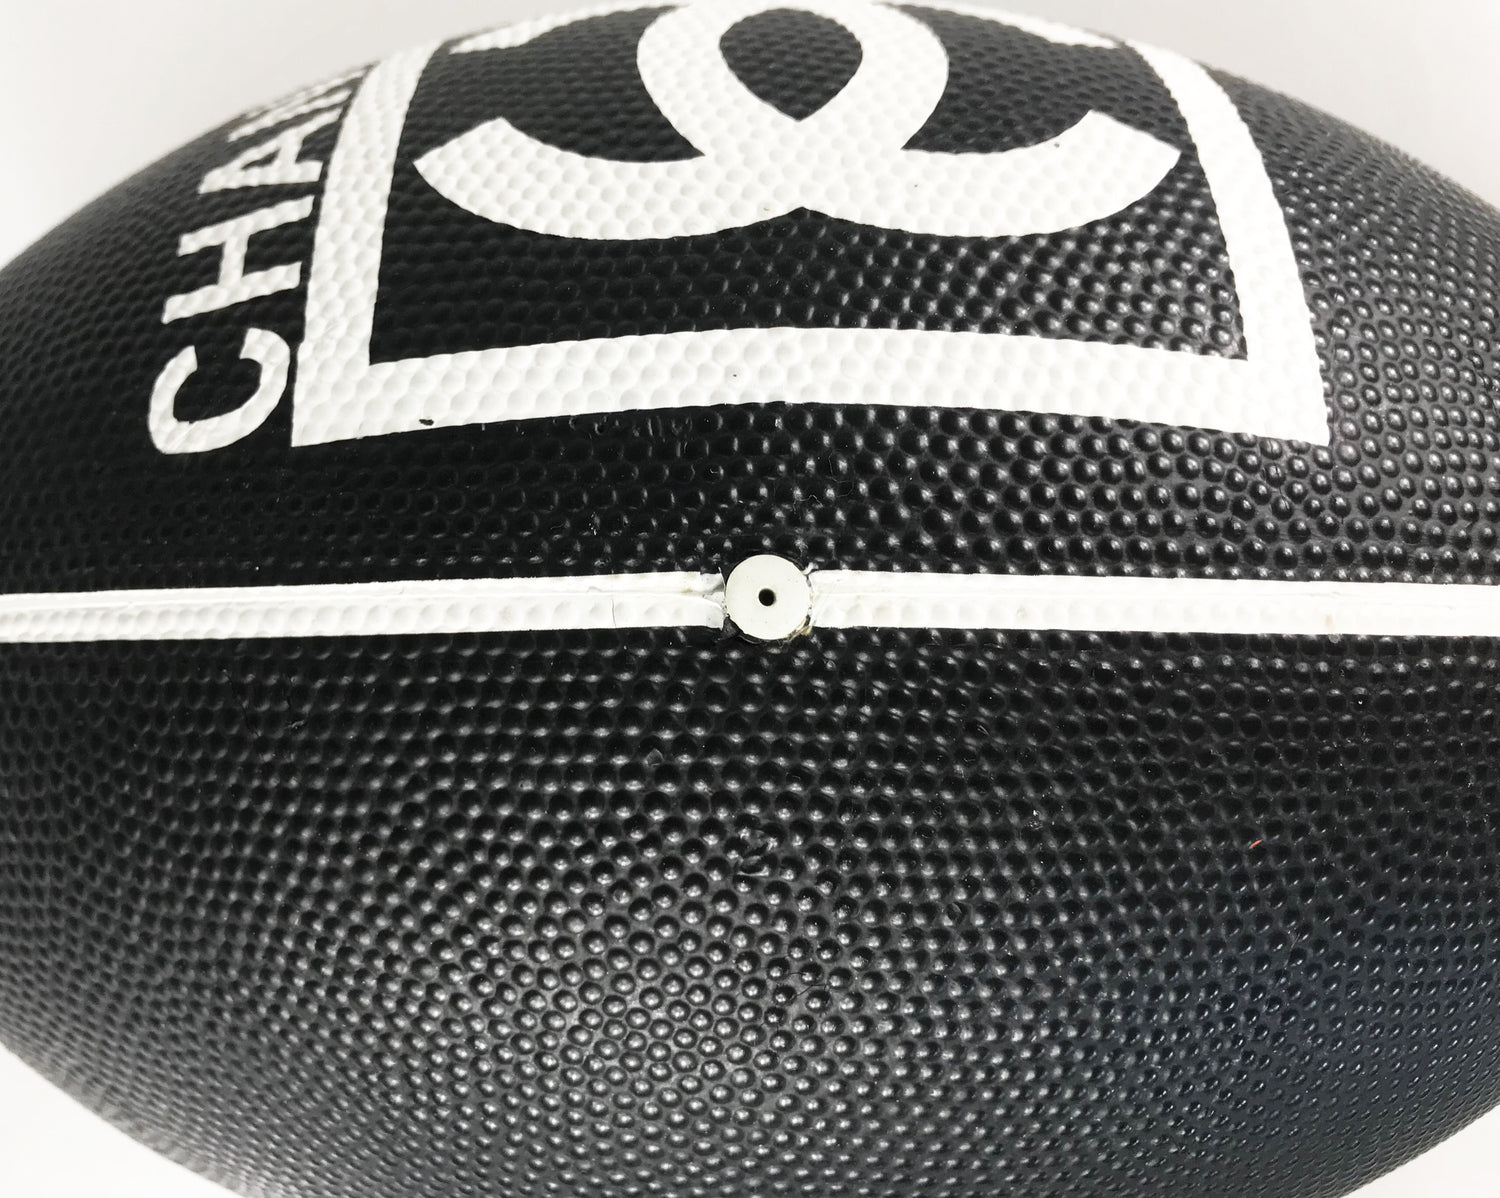 Fruit Vintage rare Chanel 2007 football. This Chanel sport logo foot ball by Karl Lagerfeld is an important Chanel collectors accessory. It features a large Chanel logo and text in black and white